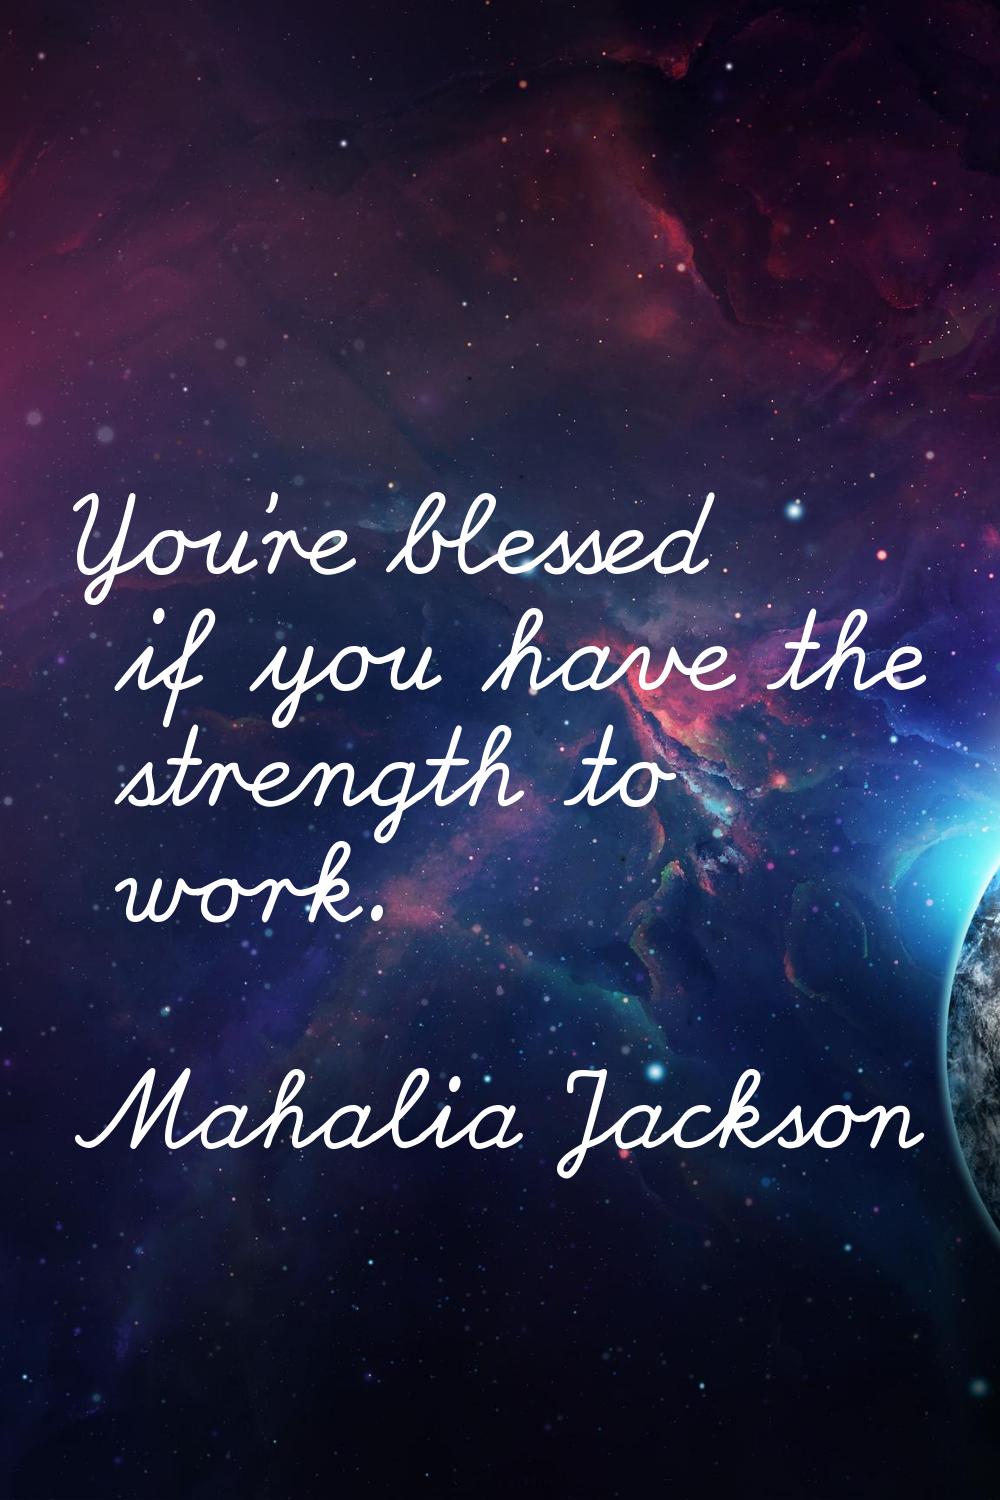 You're blessed if you have the strength to work.